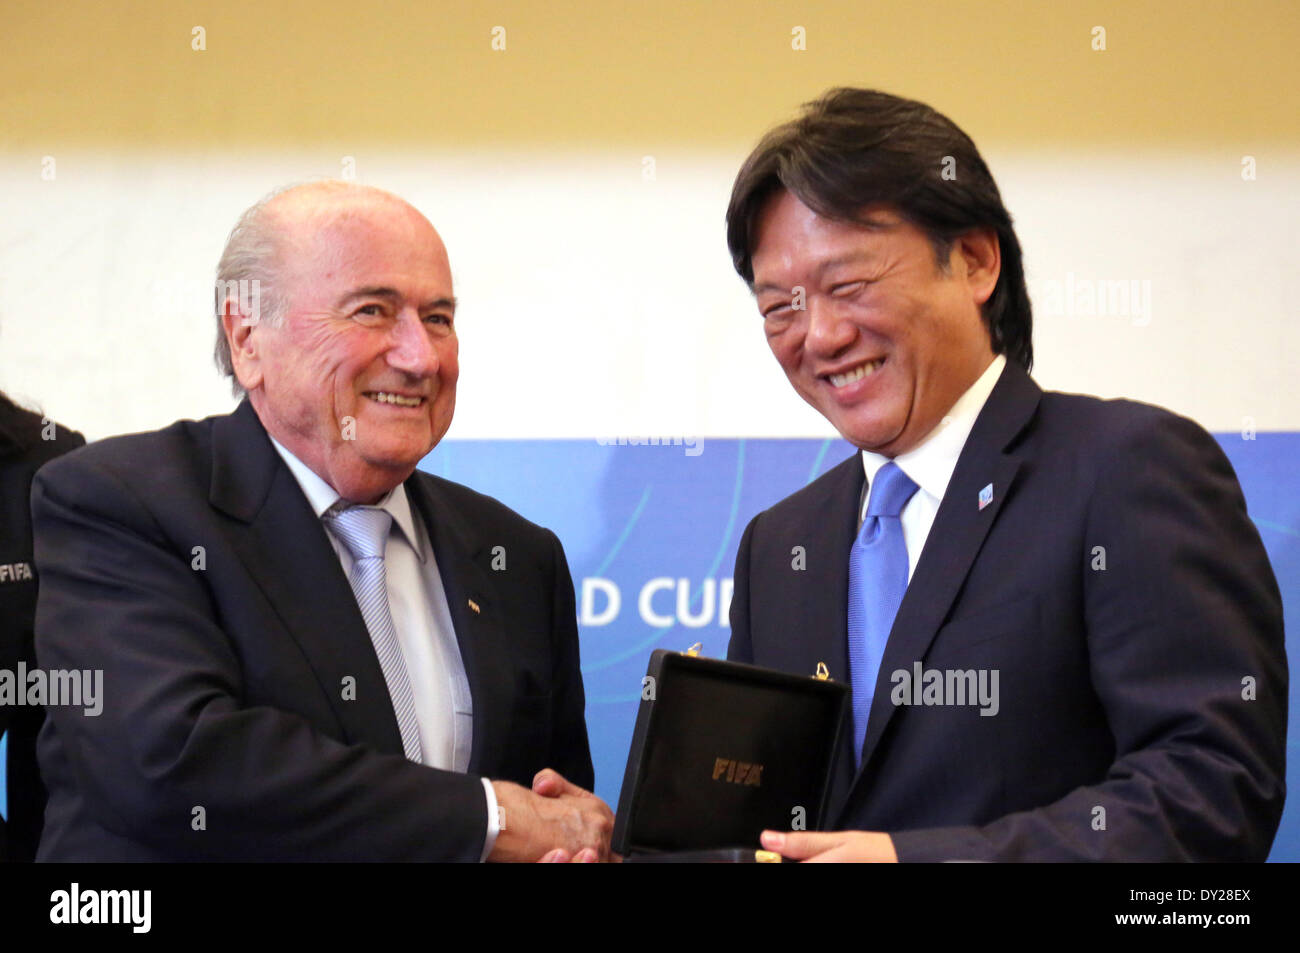 San Jose, Costa Rica. 3rd Apr, 2014. FIFA President Joseph Blatter (L) shakes hands with the President of Costa Rica's Football Federation Eduardo Li during a press conference of the FIFA U-17 Women's World Cup Costa Rica 2014 in San Jose, Costa Rica, on April 3, 2014. Joseph Blatter was in Costa Rica to participate in the closure activities of the FIFA U-17 Women's World Cup Costa Rica 2014. © Kent Gilbert/Xinhua/Alamy Live News Stock Photo